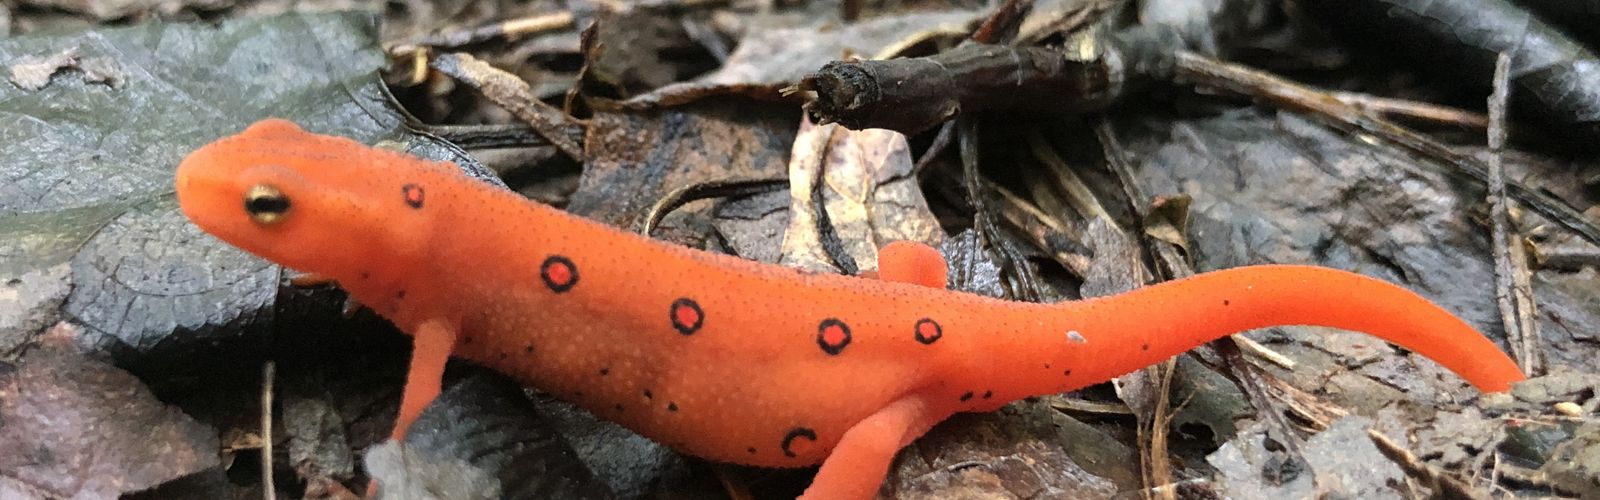 A close-up of a bright orange-red amphibian, with red spots outlined in black, on a bed of dry brown leaves.